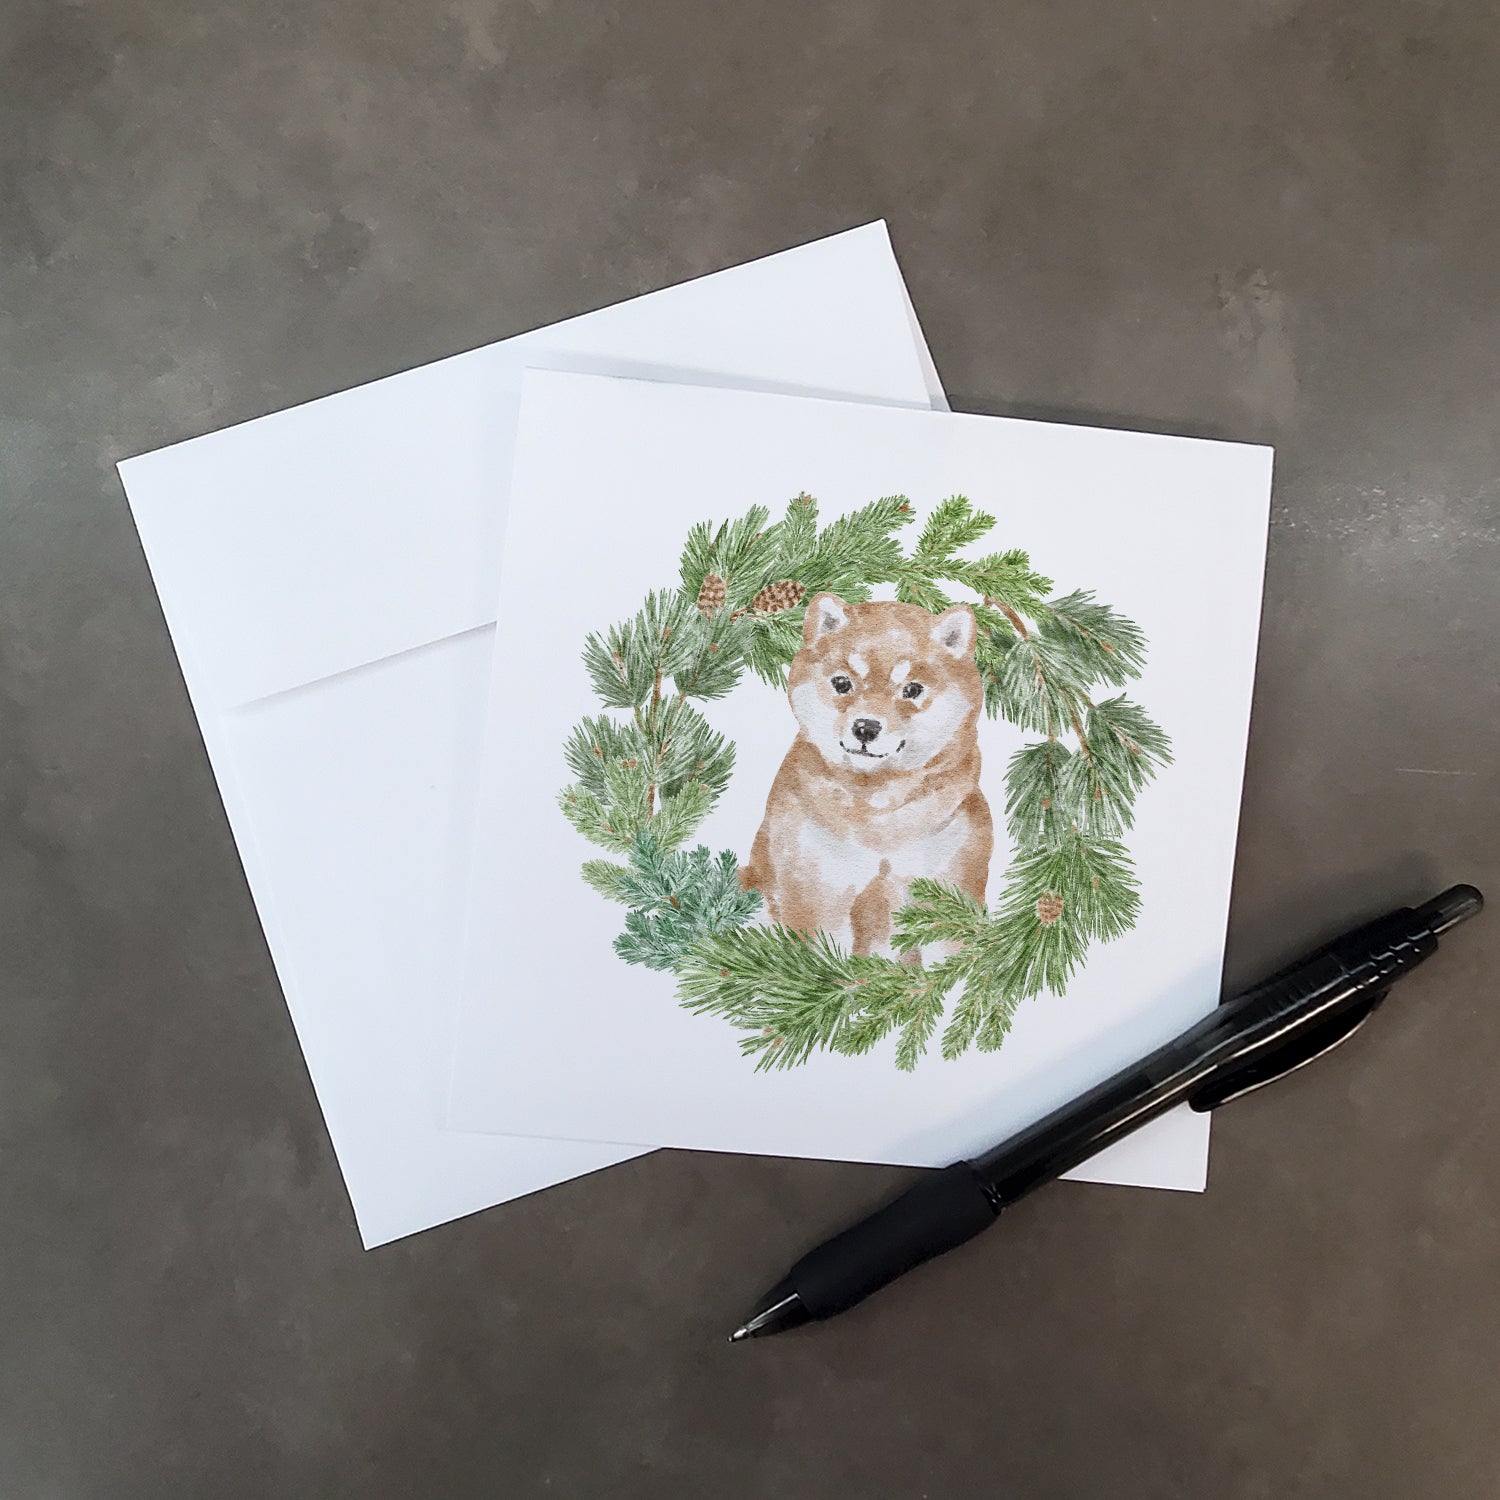 Buy this Shiba Inu Puppy Sitting Pretty with Christmas Wreath Square Greeting Cards and Envelopes Pack of 8